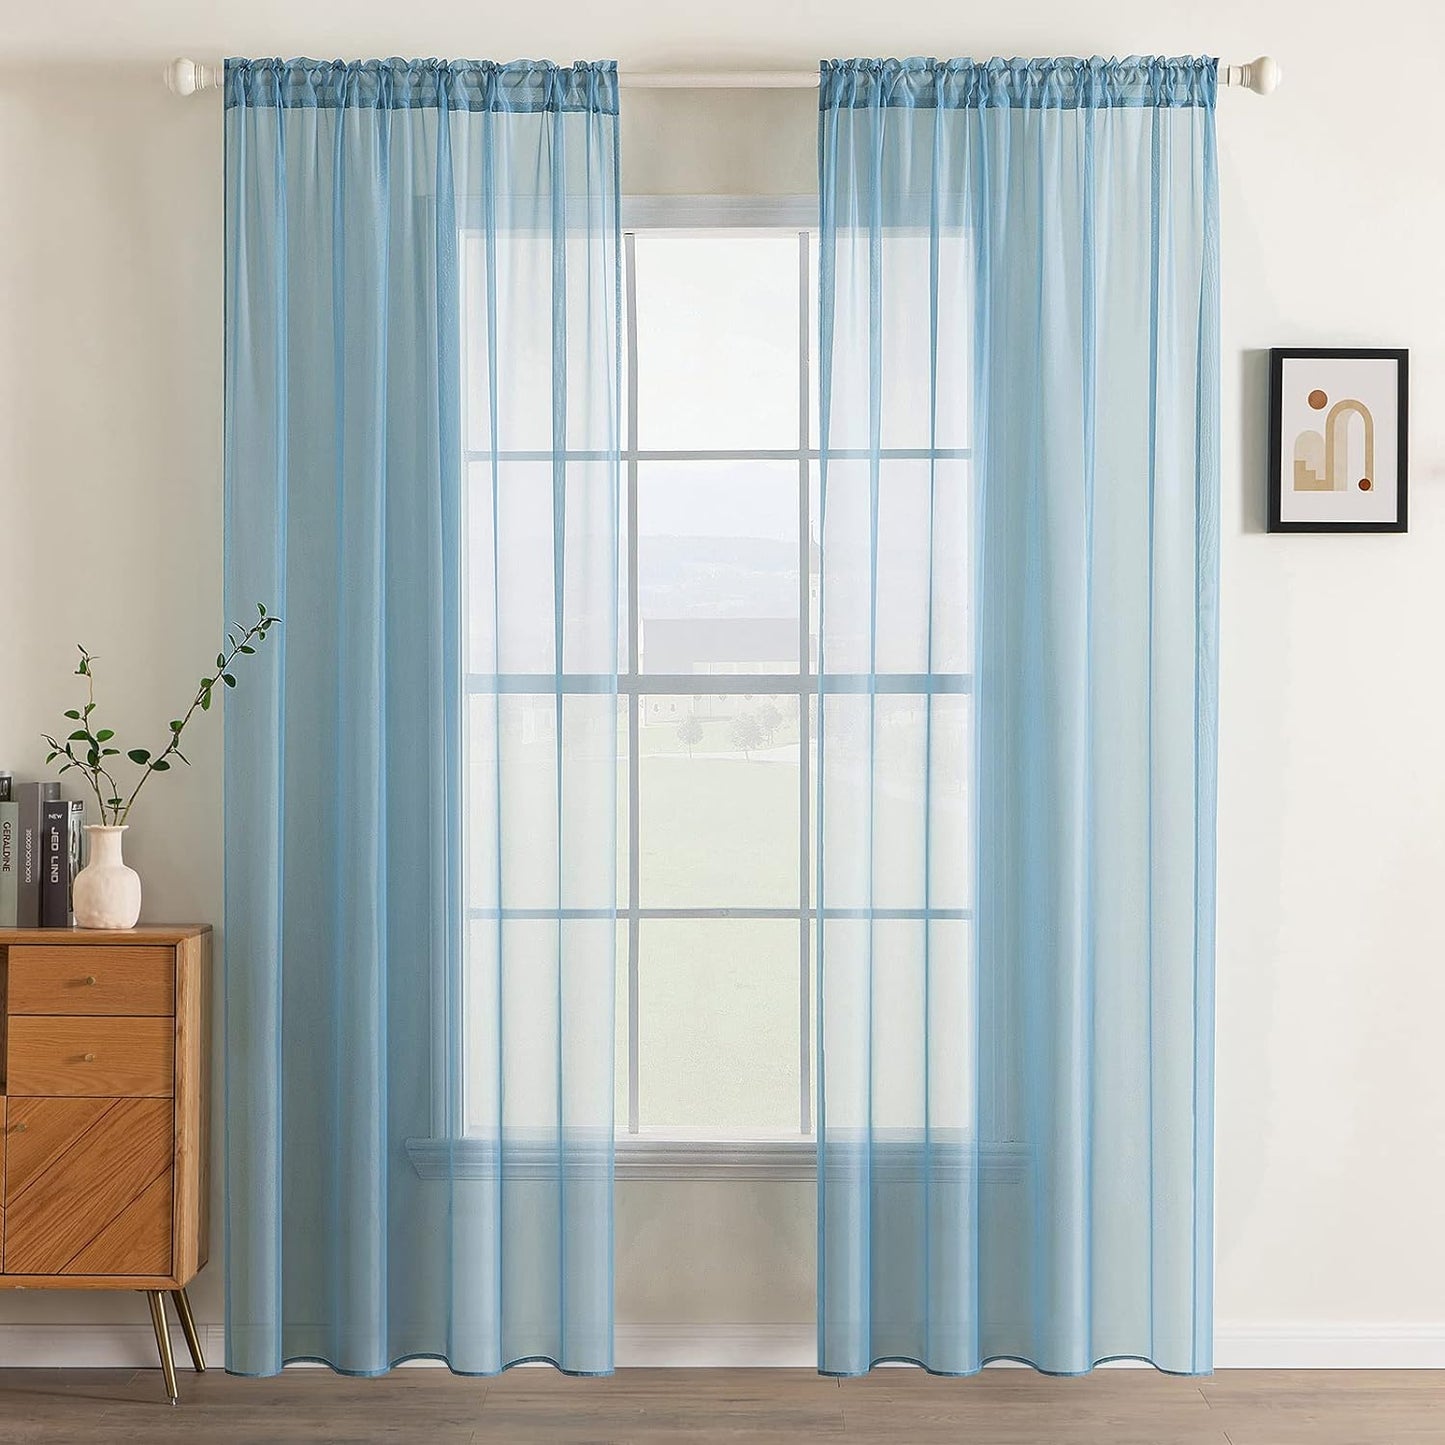 MIULEE White Sheer Curtains 96 Inches Long Window Curtains 2 Panels Solid Color Elegant Window Voile Panels/Drapes/Treatment for Bedroom Living Room (54 X 96 Inches White)  MIULEE Stone Blue 54''W X 96''L 